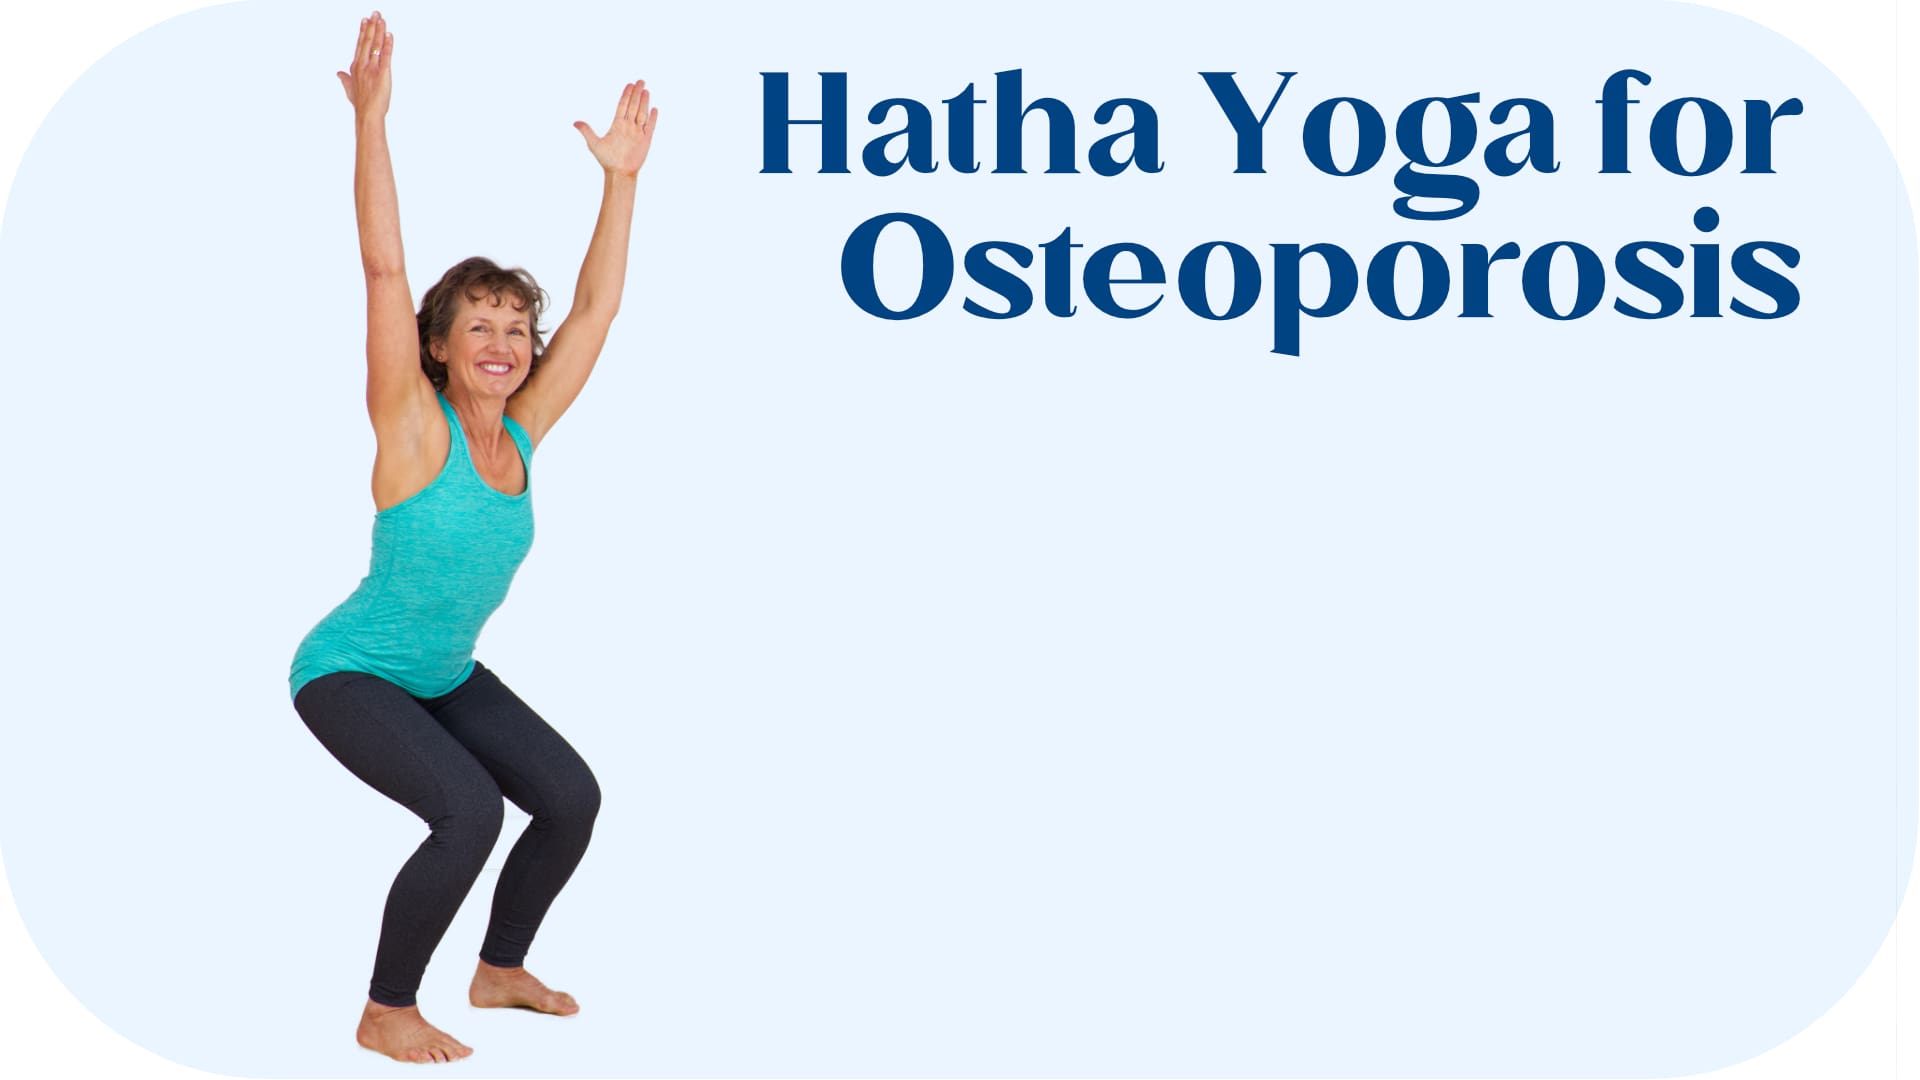 hatha yoga for osteoporosis video